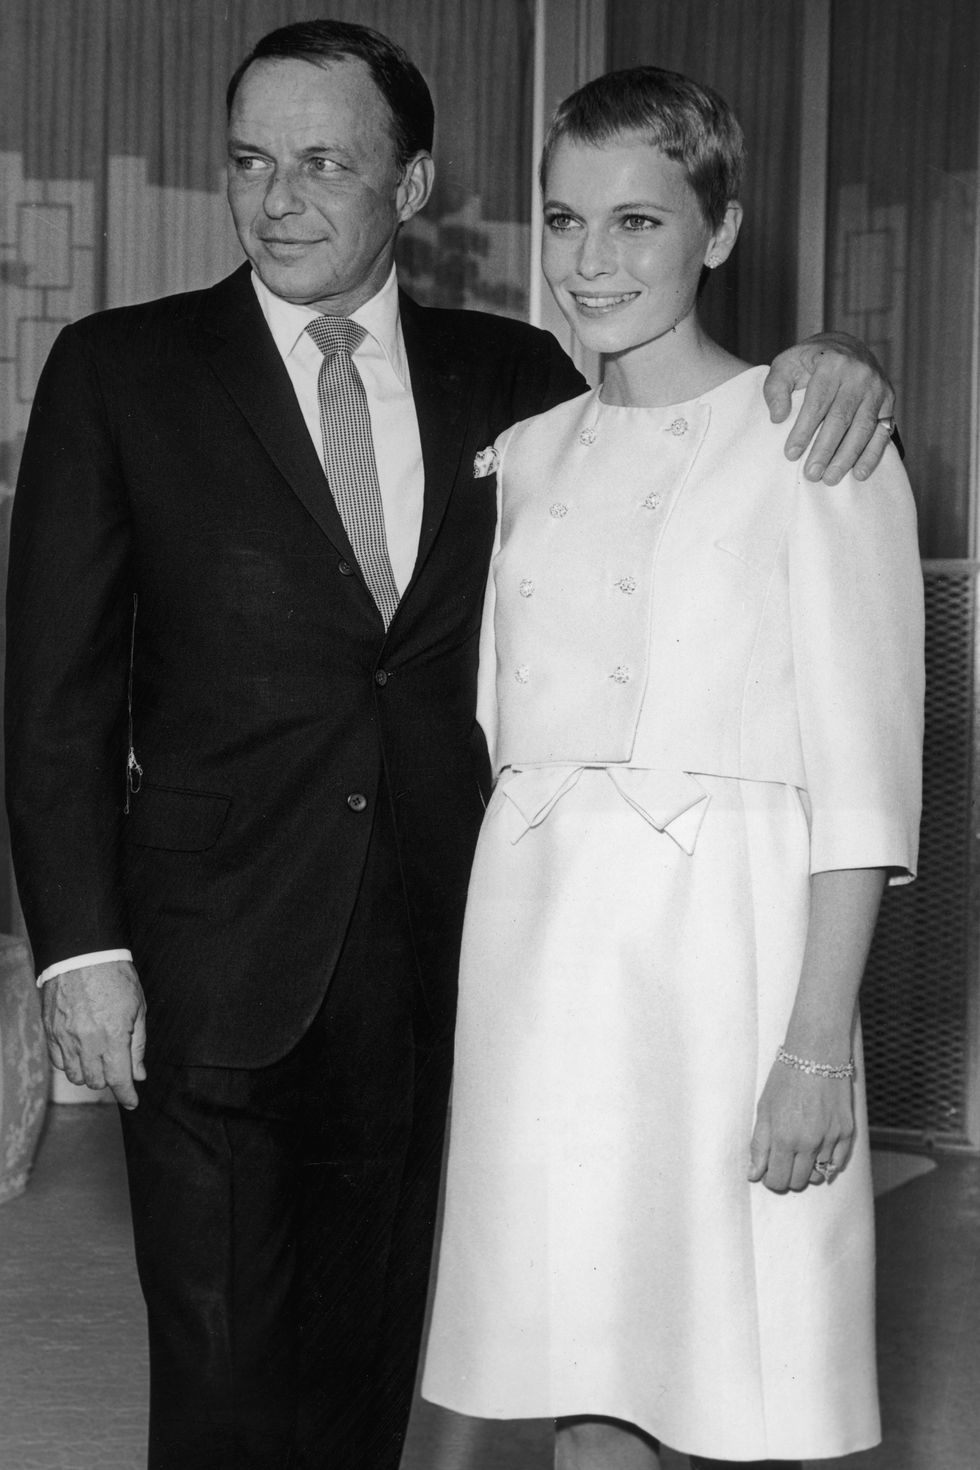 19th July 1966: American singer Frank Sinatra (1915 - 1998) stands with his arm around his third wife, actor Mia Farrow, during their private wedding in Las Vegas, Nevada. Sinatra wears a suit; Farrow has close-cropped hair and wears a pale-colored dress and matching cropped jacket. (Photo by Hulton Archive/Getty Images)